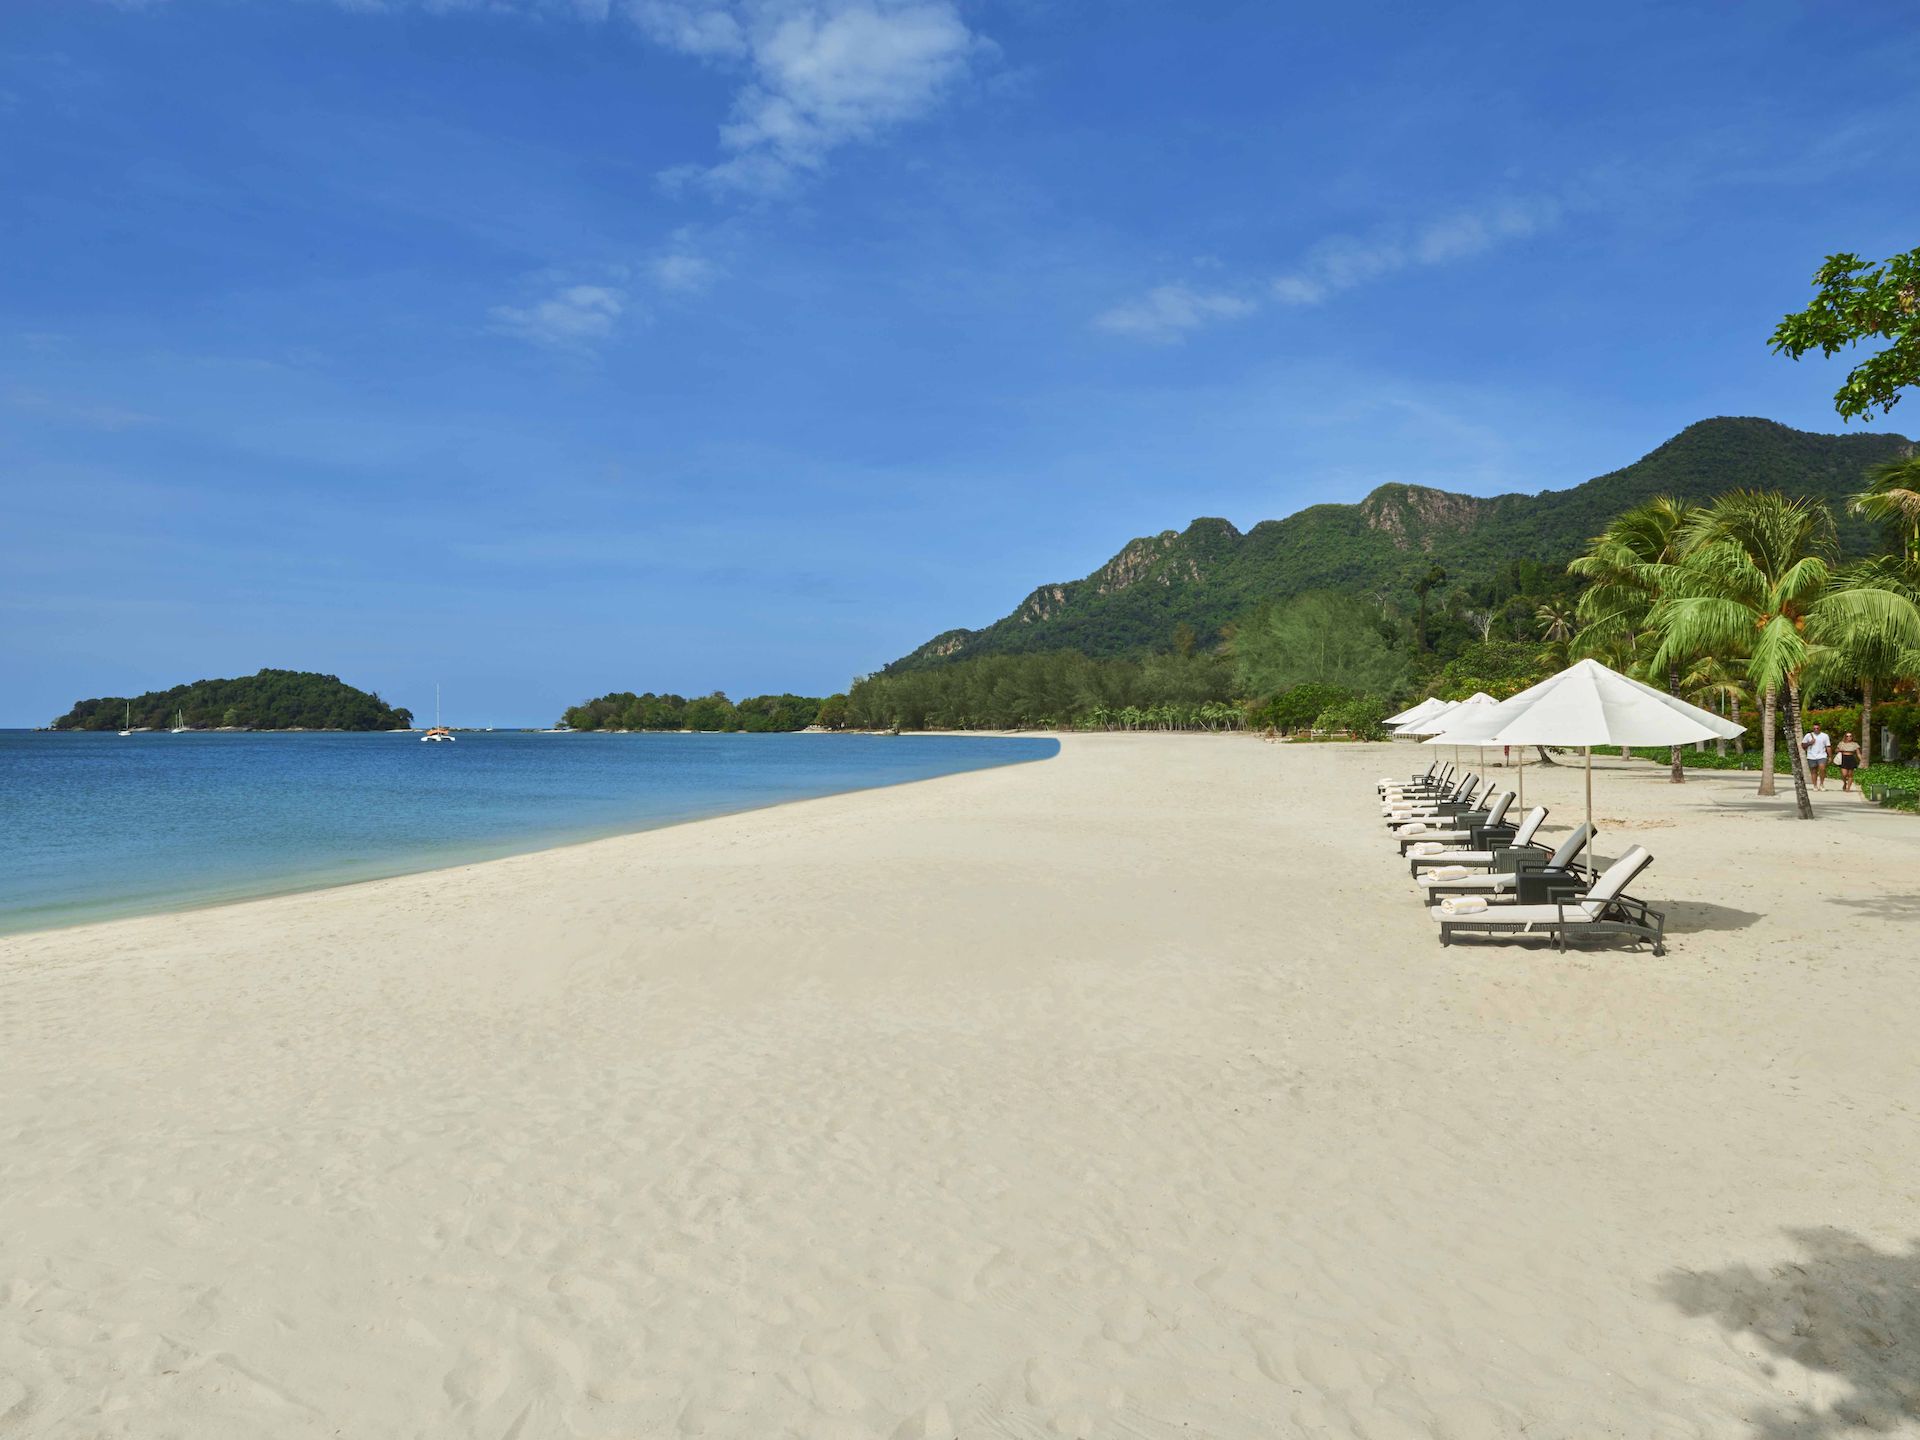 The Danna Langkawi’s gorgeous secluded beach